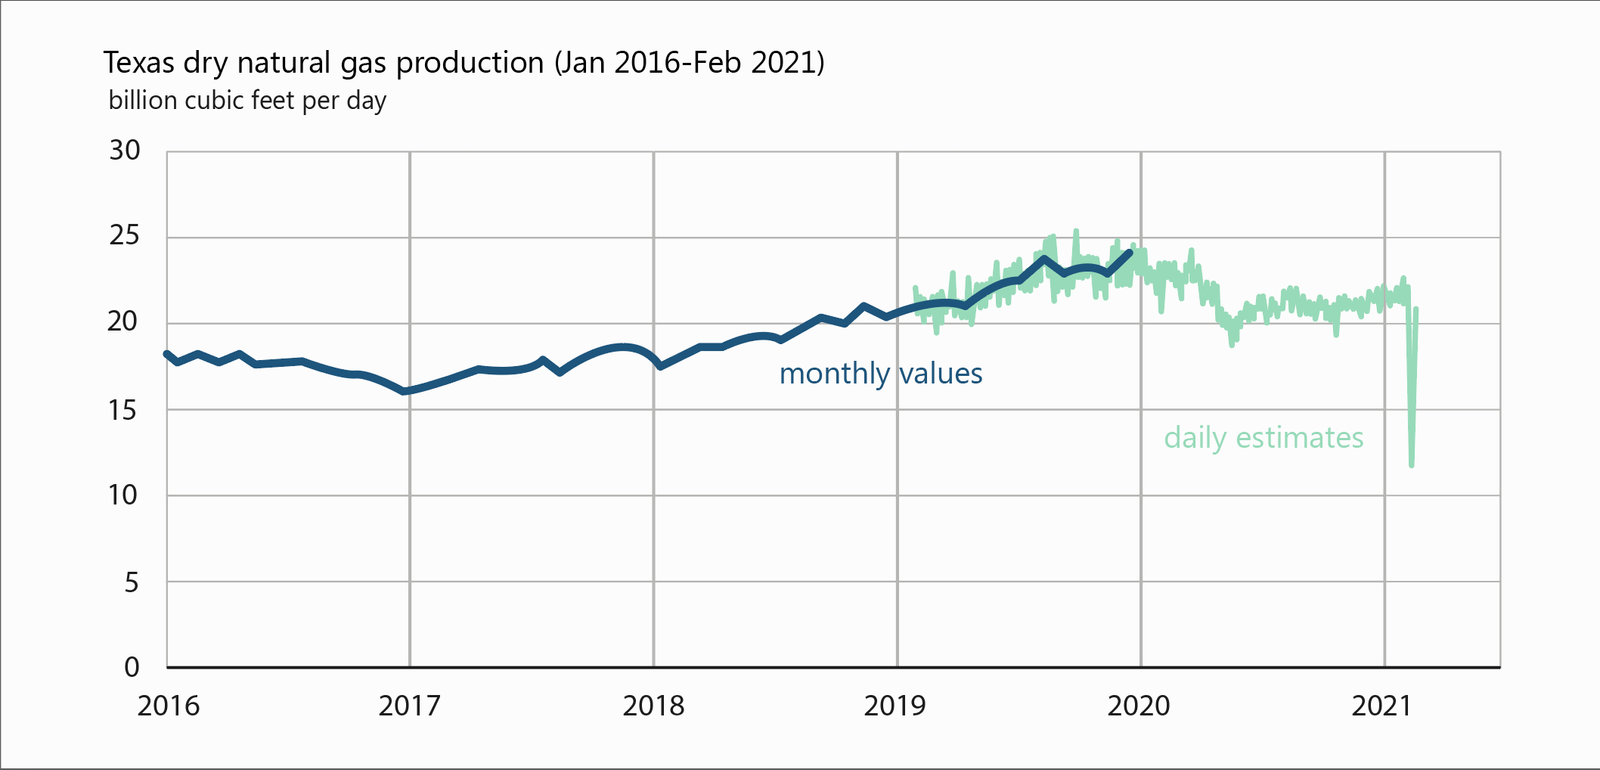 Texas Dry Natural Gas Production (2016-2021)